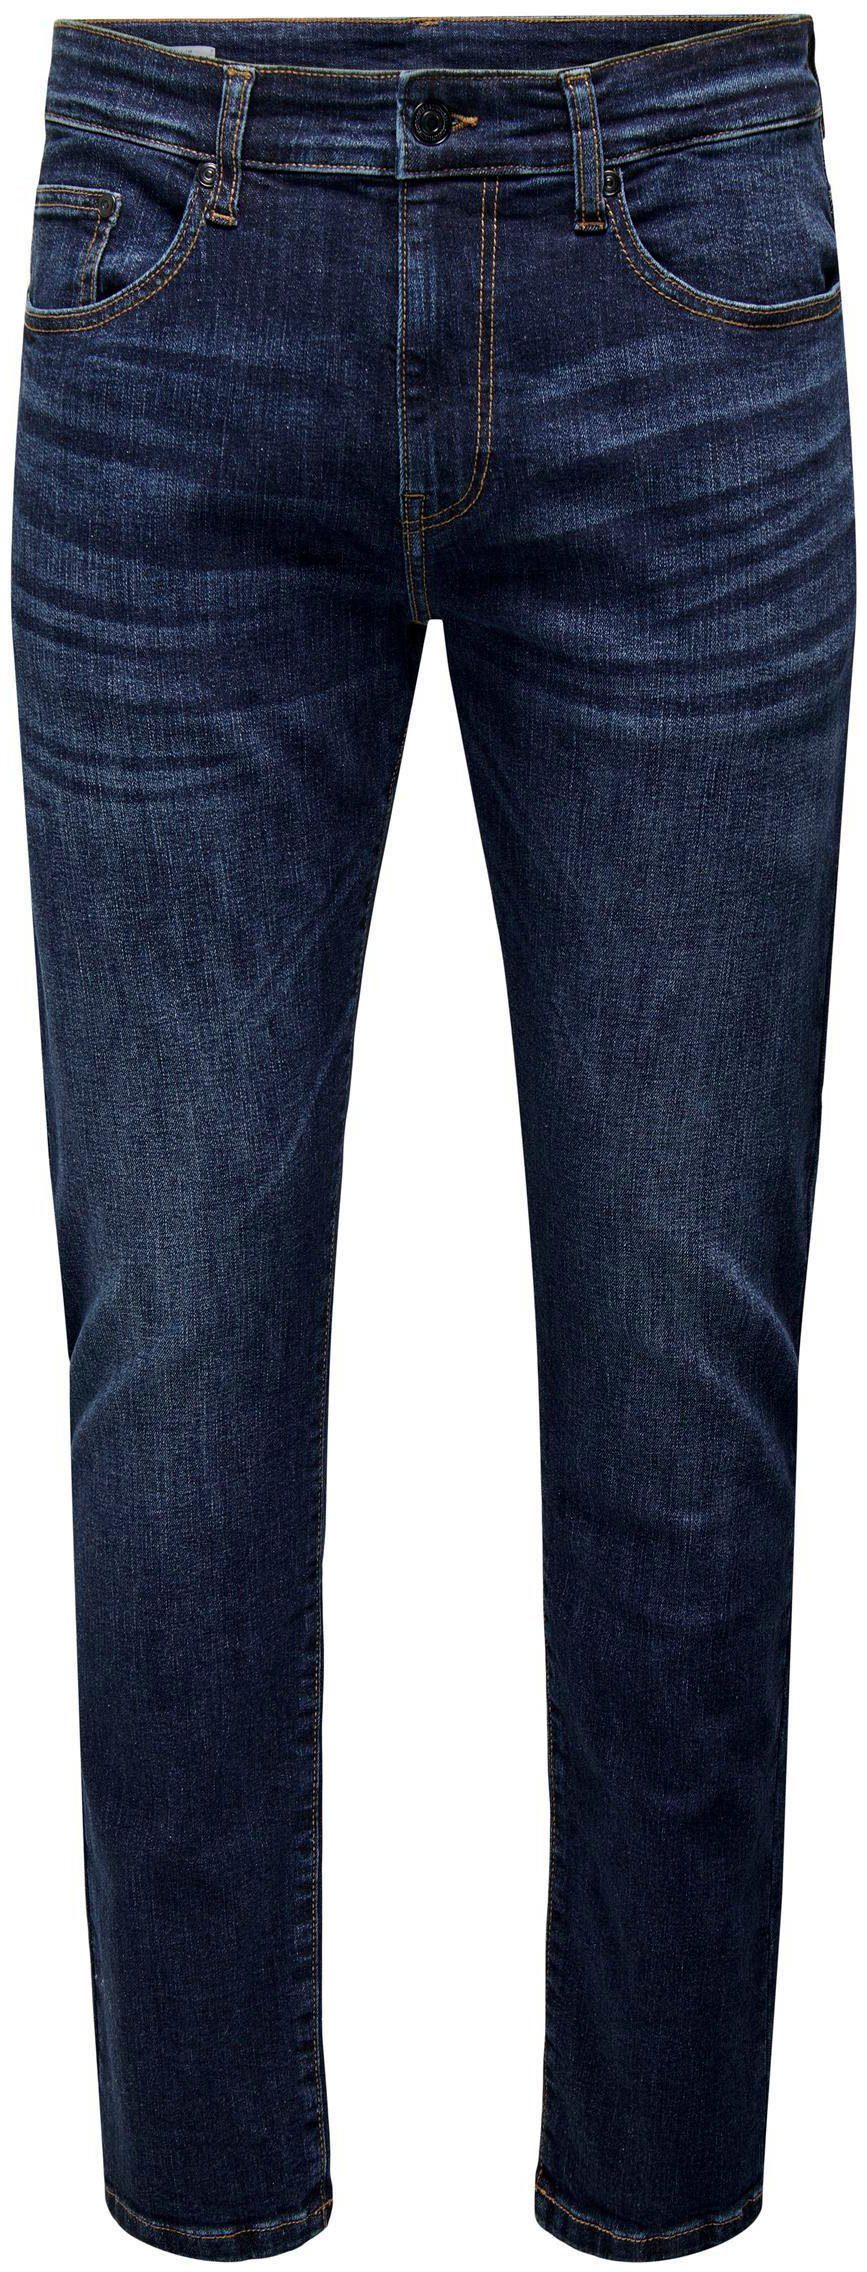 ONSWEFT JEANS DNM BLUE NOOS Straight-Jeans SONS 6752 & ONLY REG.DK.